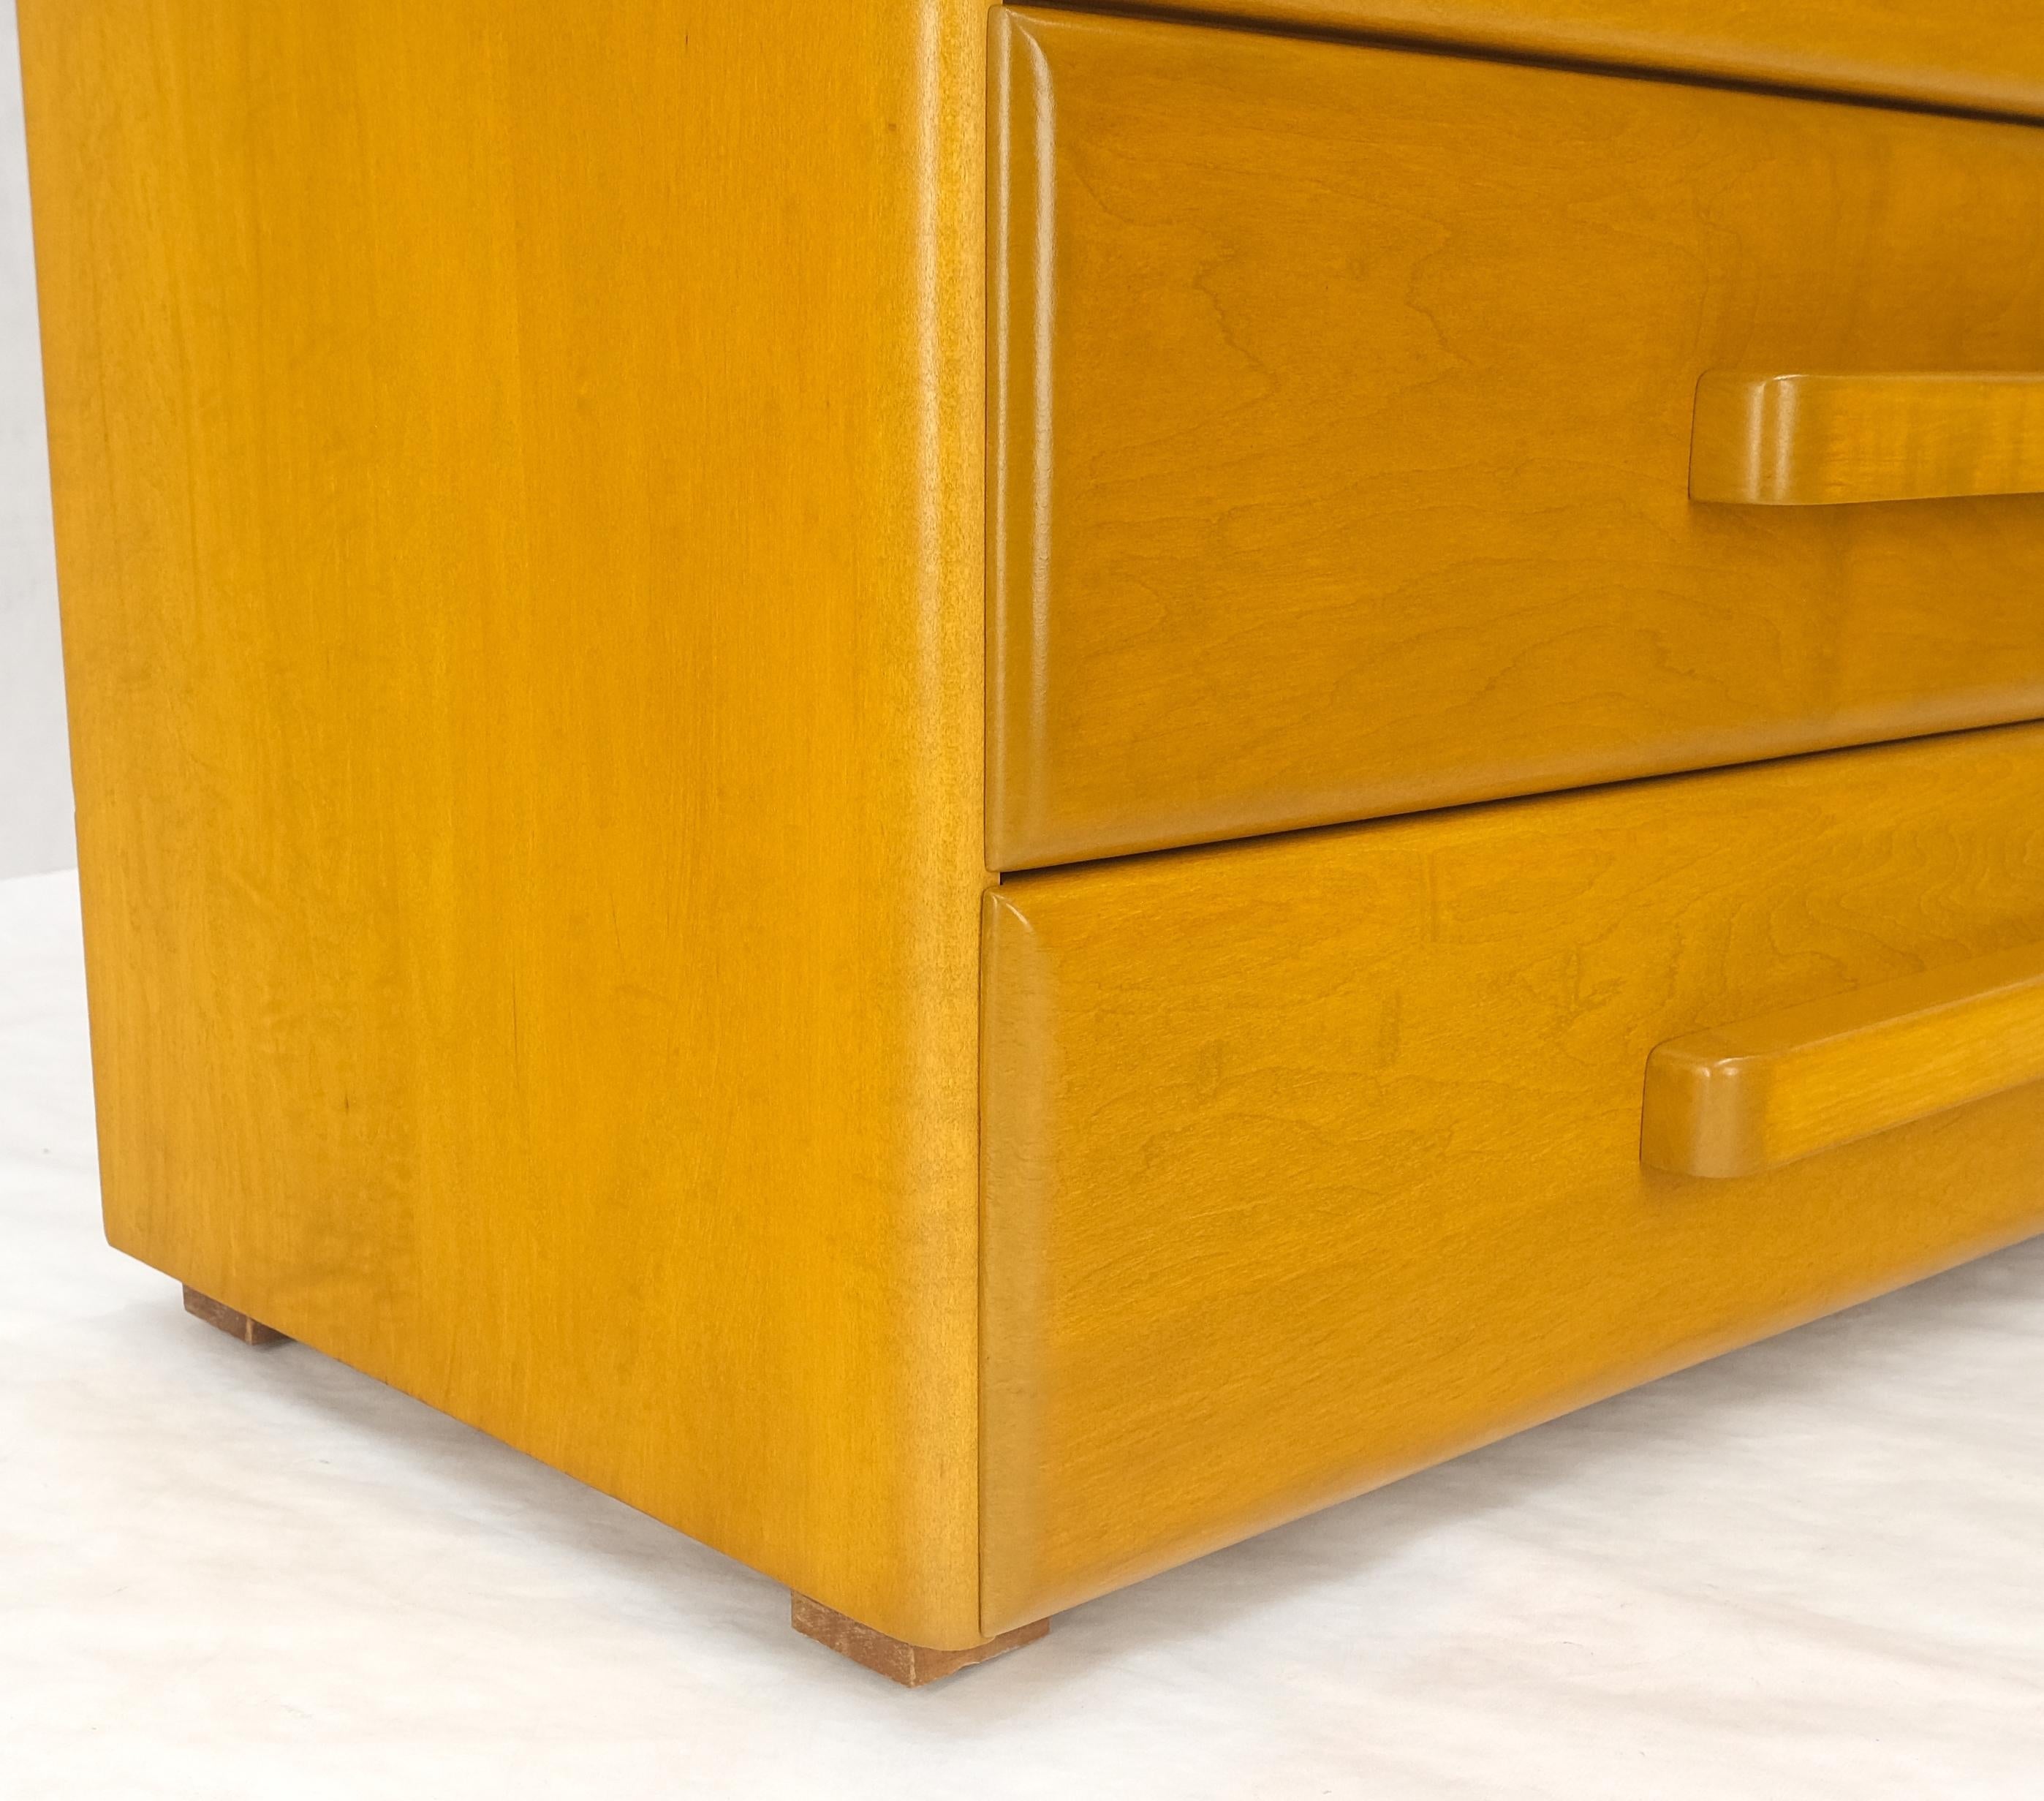 1960 Solid Maple Restored Wrussel Right Conant Ball Solid Maple 4 Drawer Dresser For Sale 1